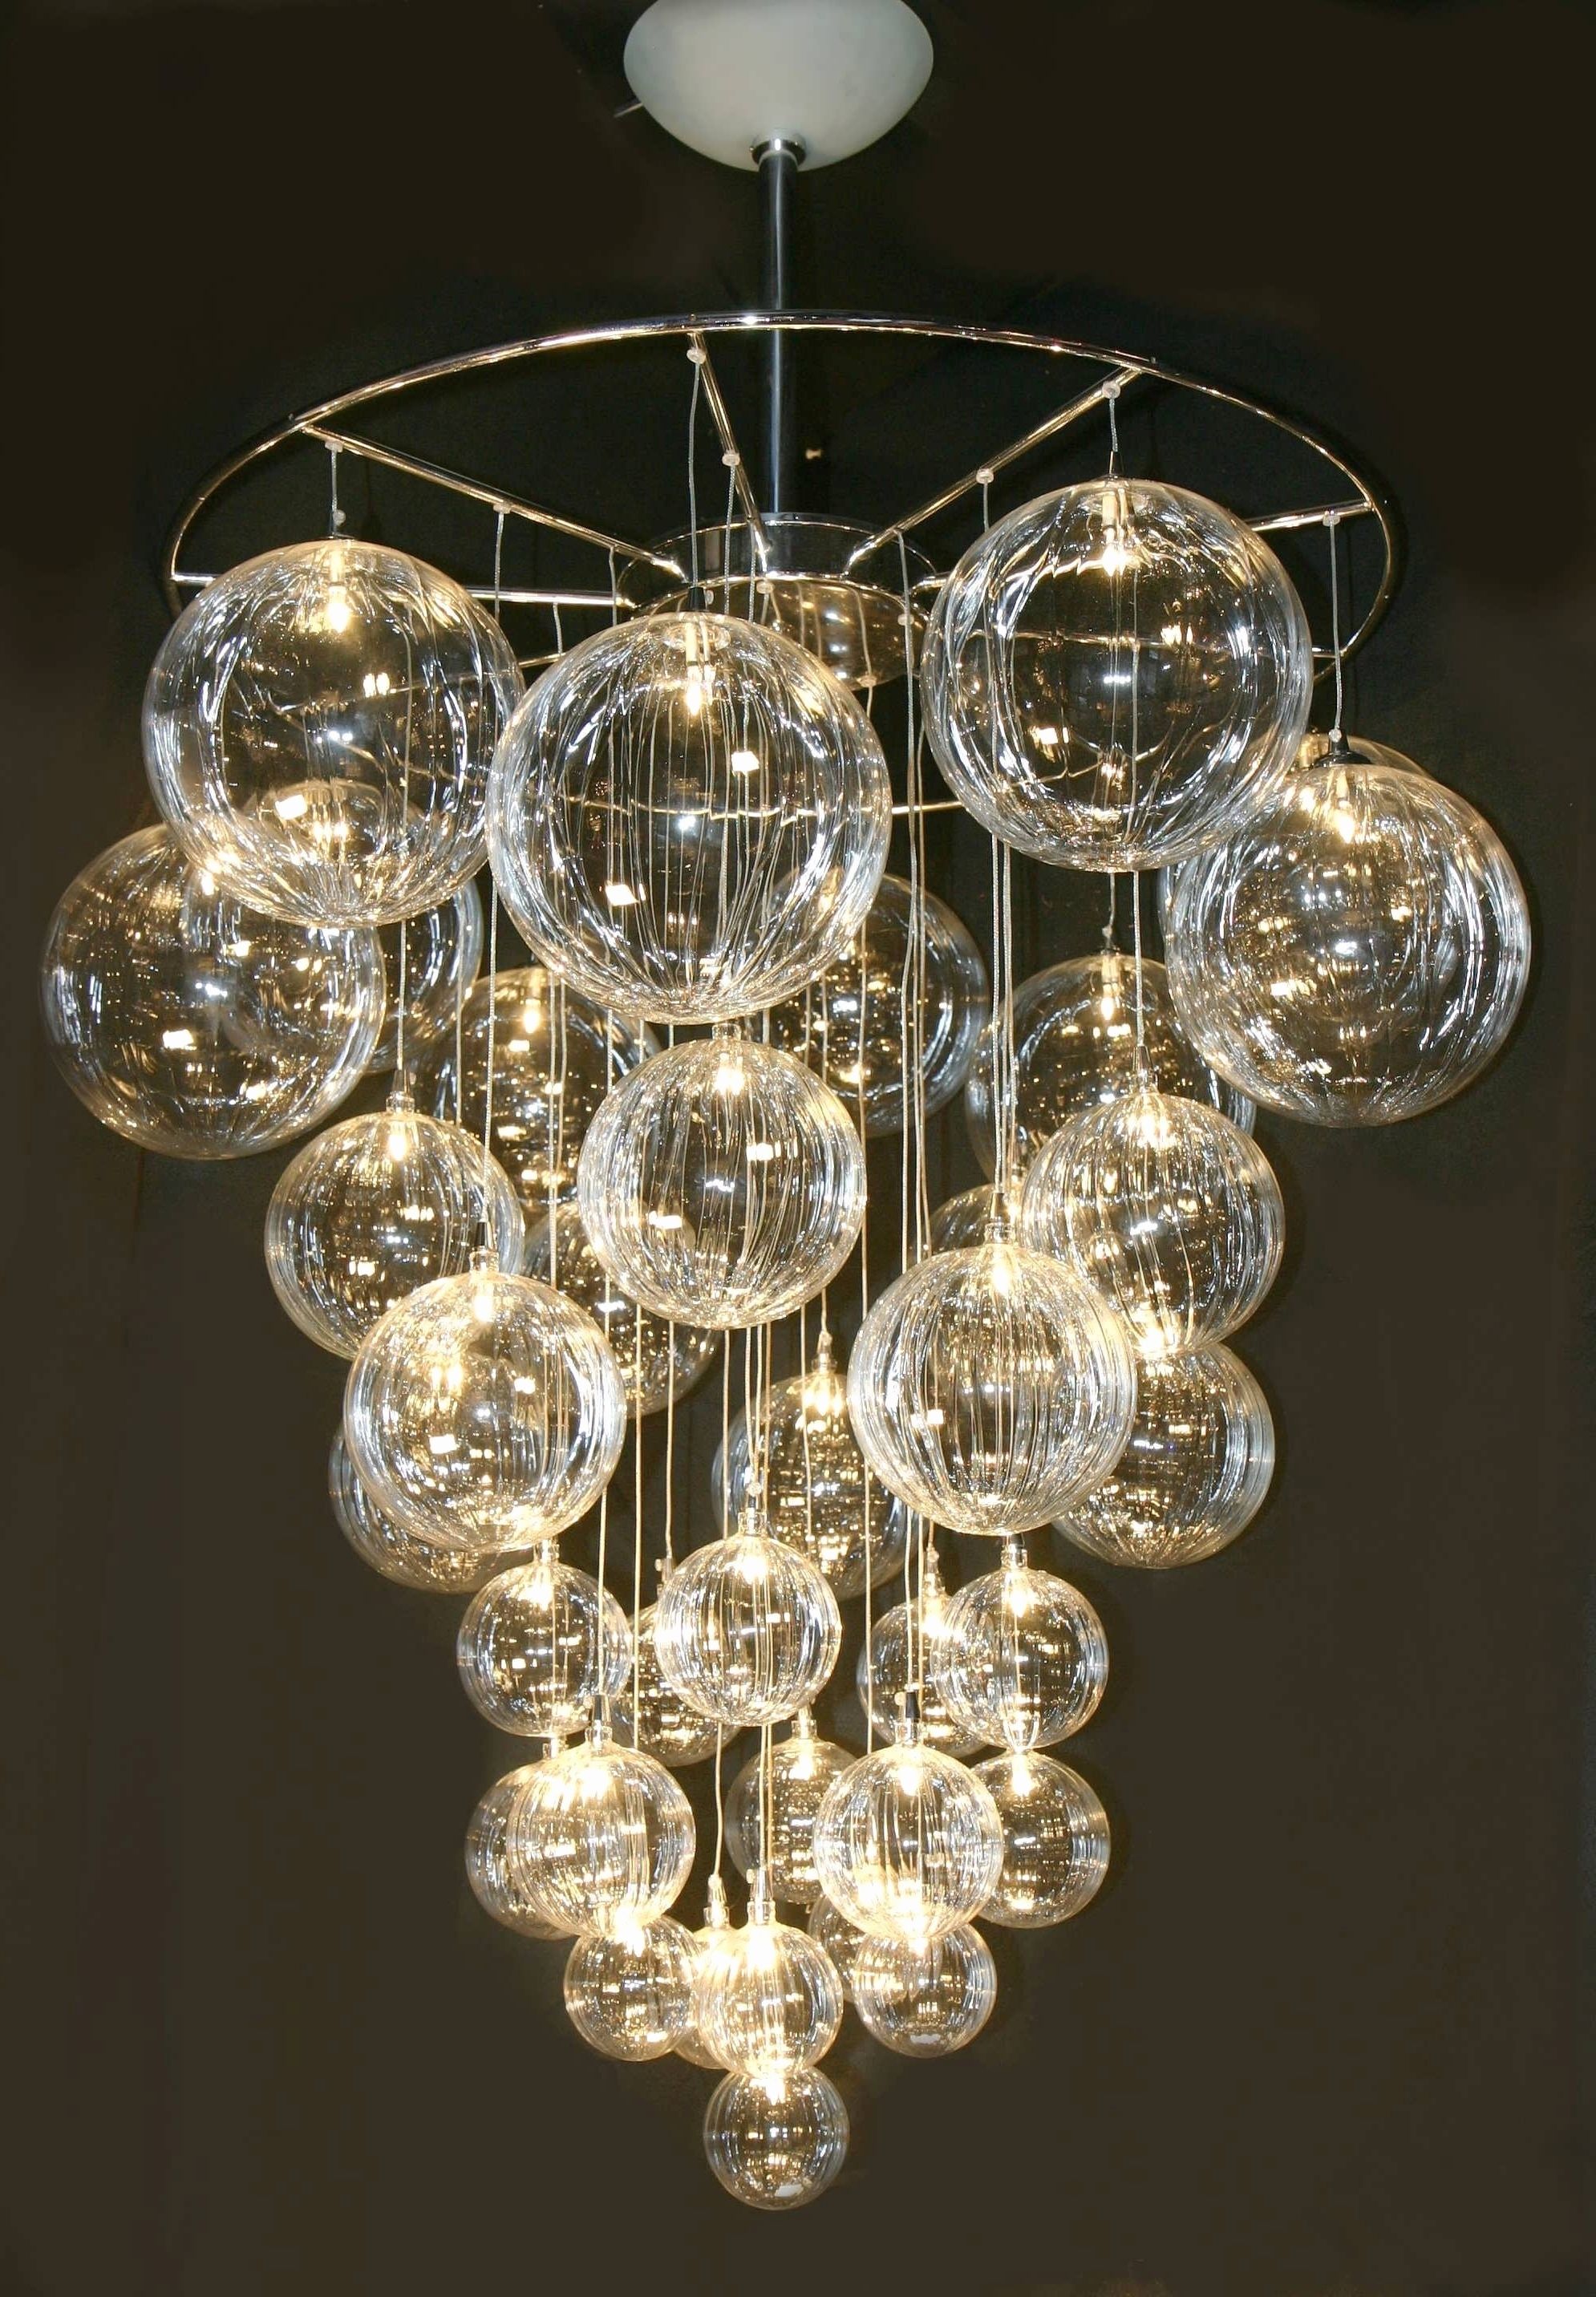 Popular Modern Glass Chandeliers Intended For Chandeliers : Modern Glass Chandelier Best Of Globe Chandelier (View 13 of 20)